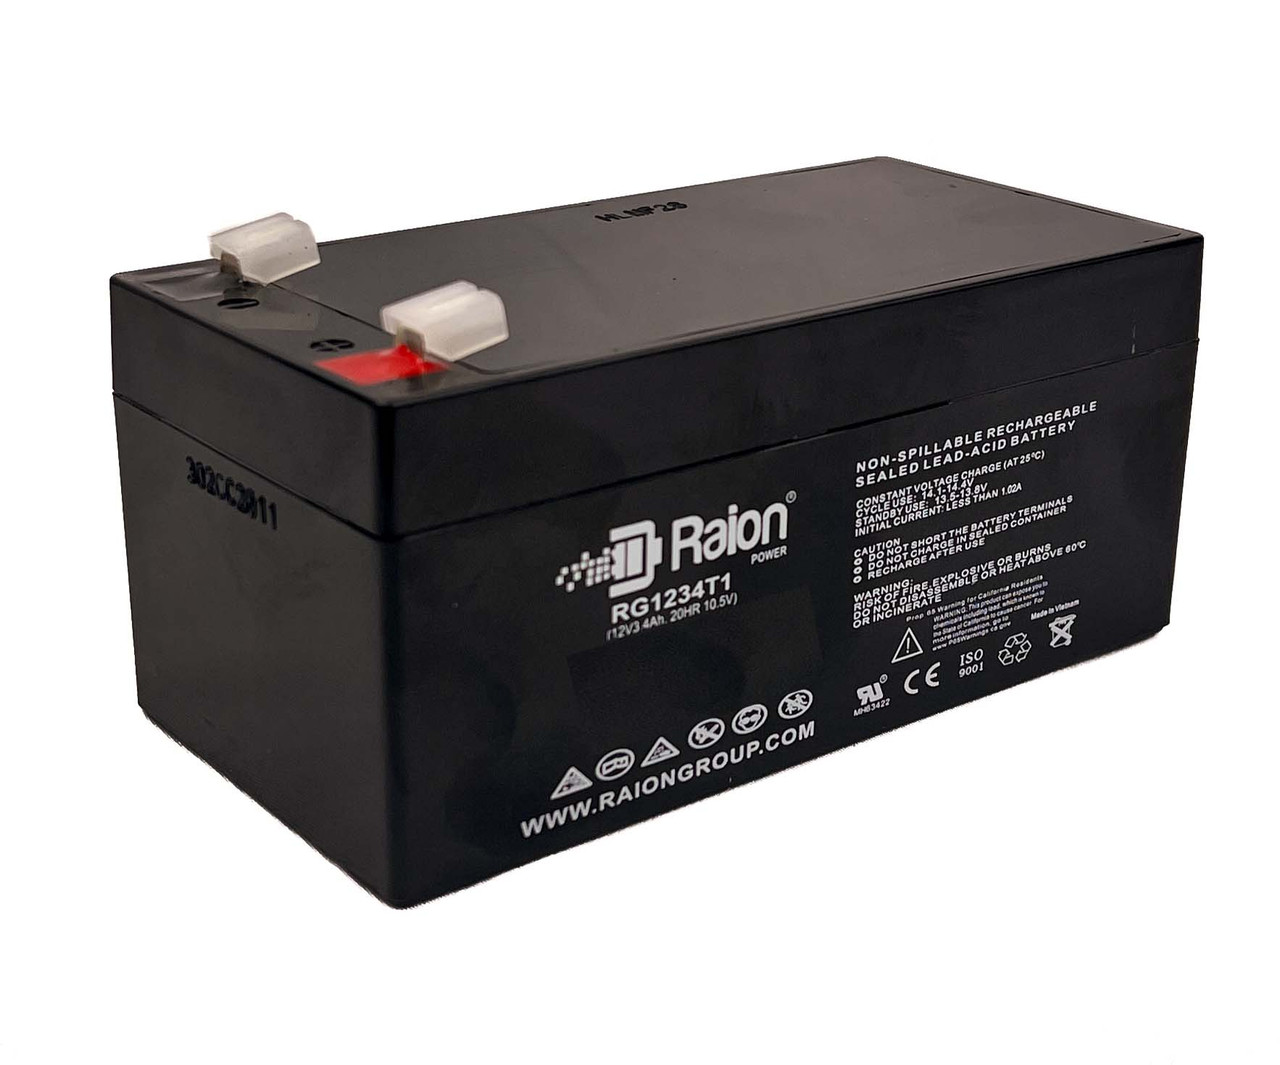 Raion Power 12V 3.4Ah Non-Spillable Replacement Battery for Power Kingdom PS3-12